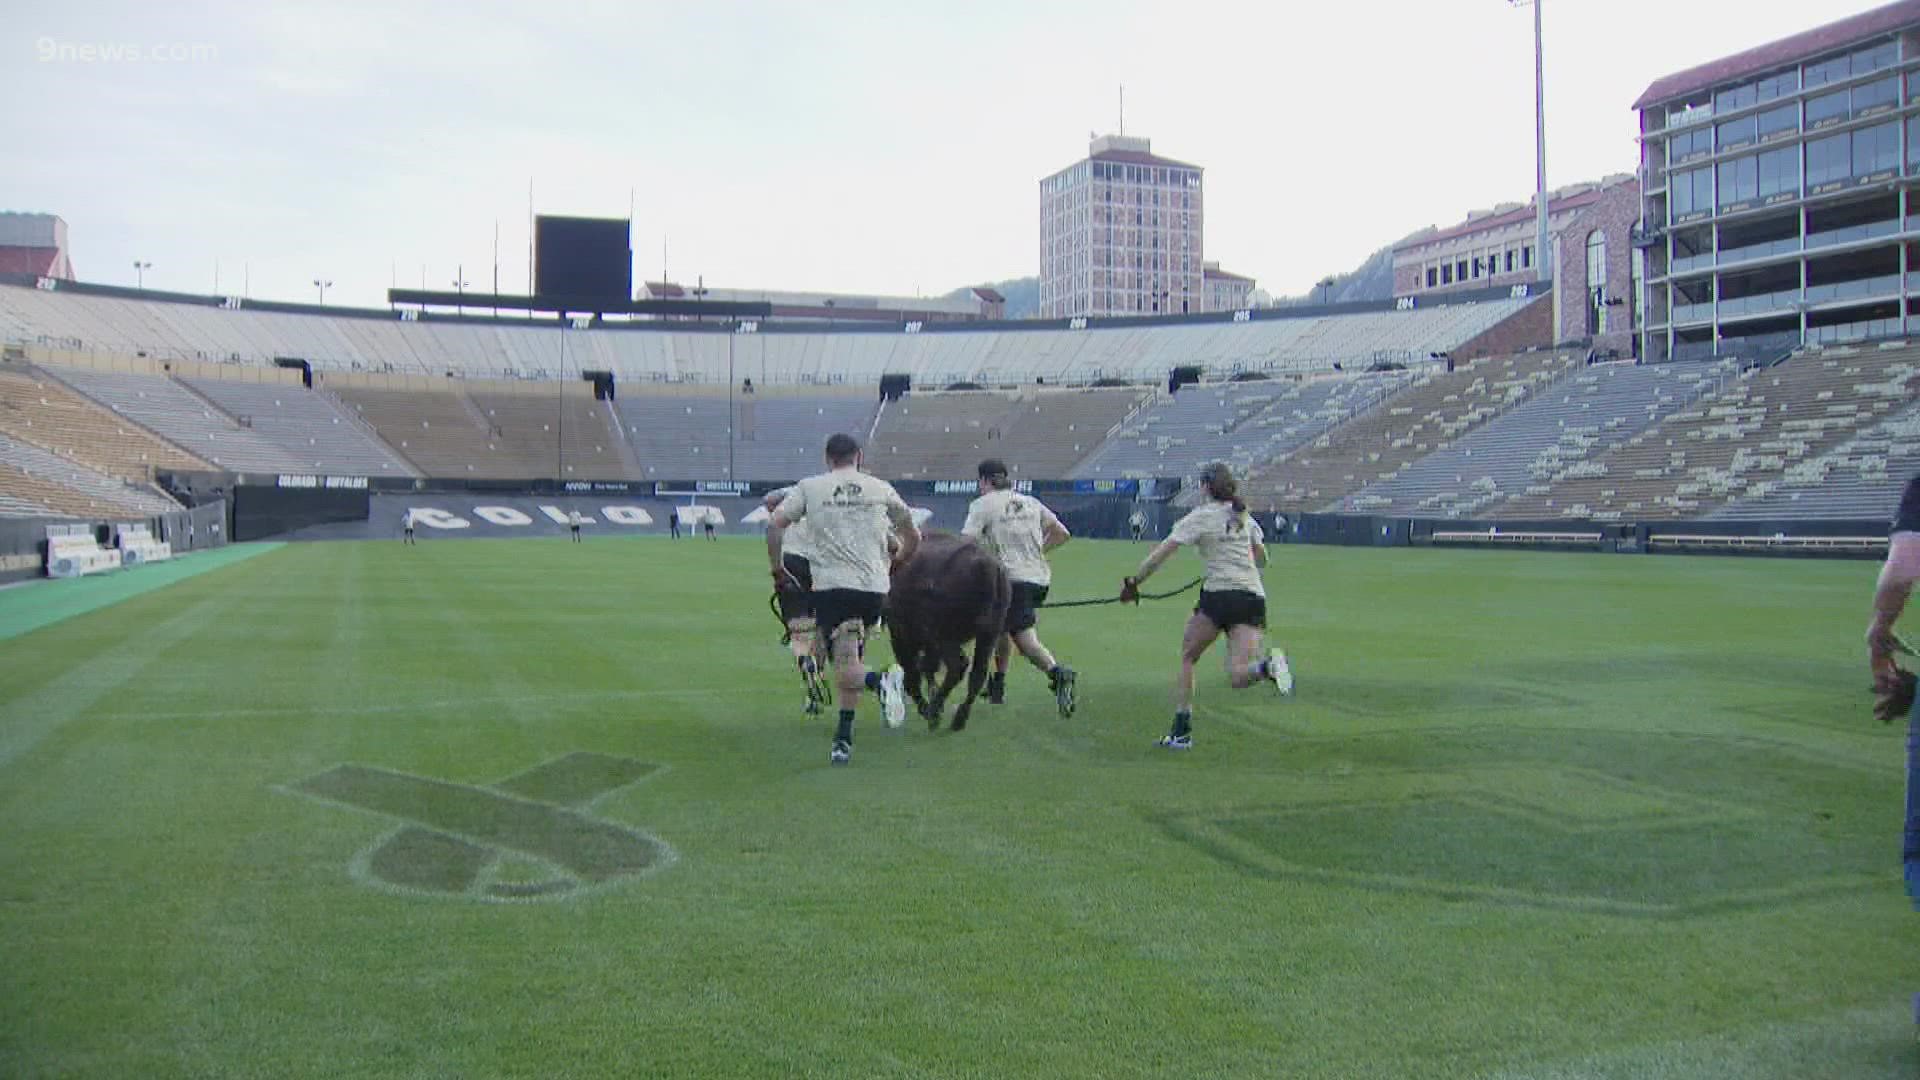 Ask any CU fan about ramblin' Ralphie, and you quickly realize she's a point of Buff pride.